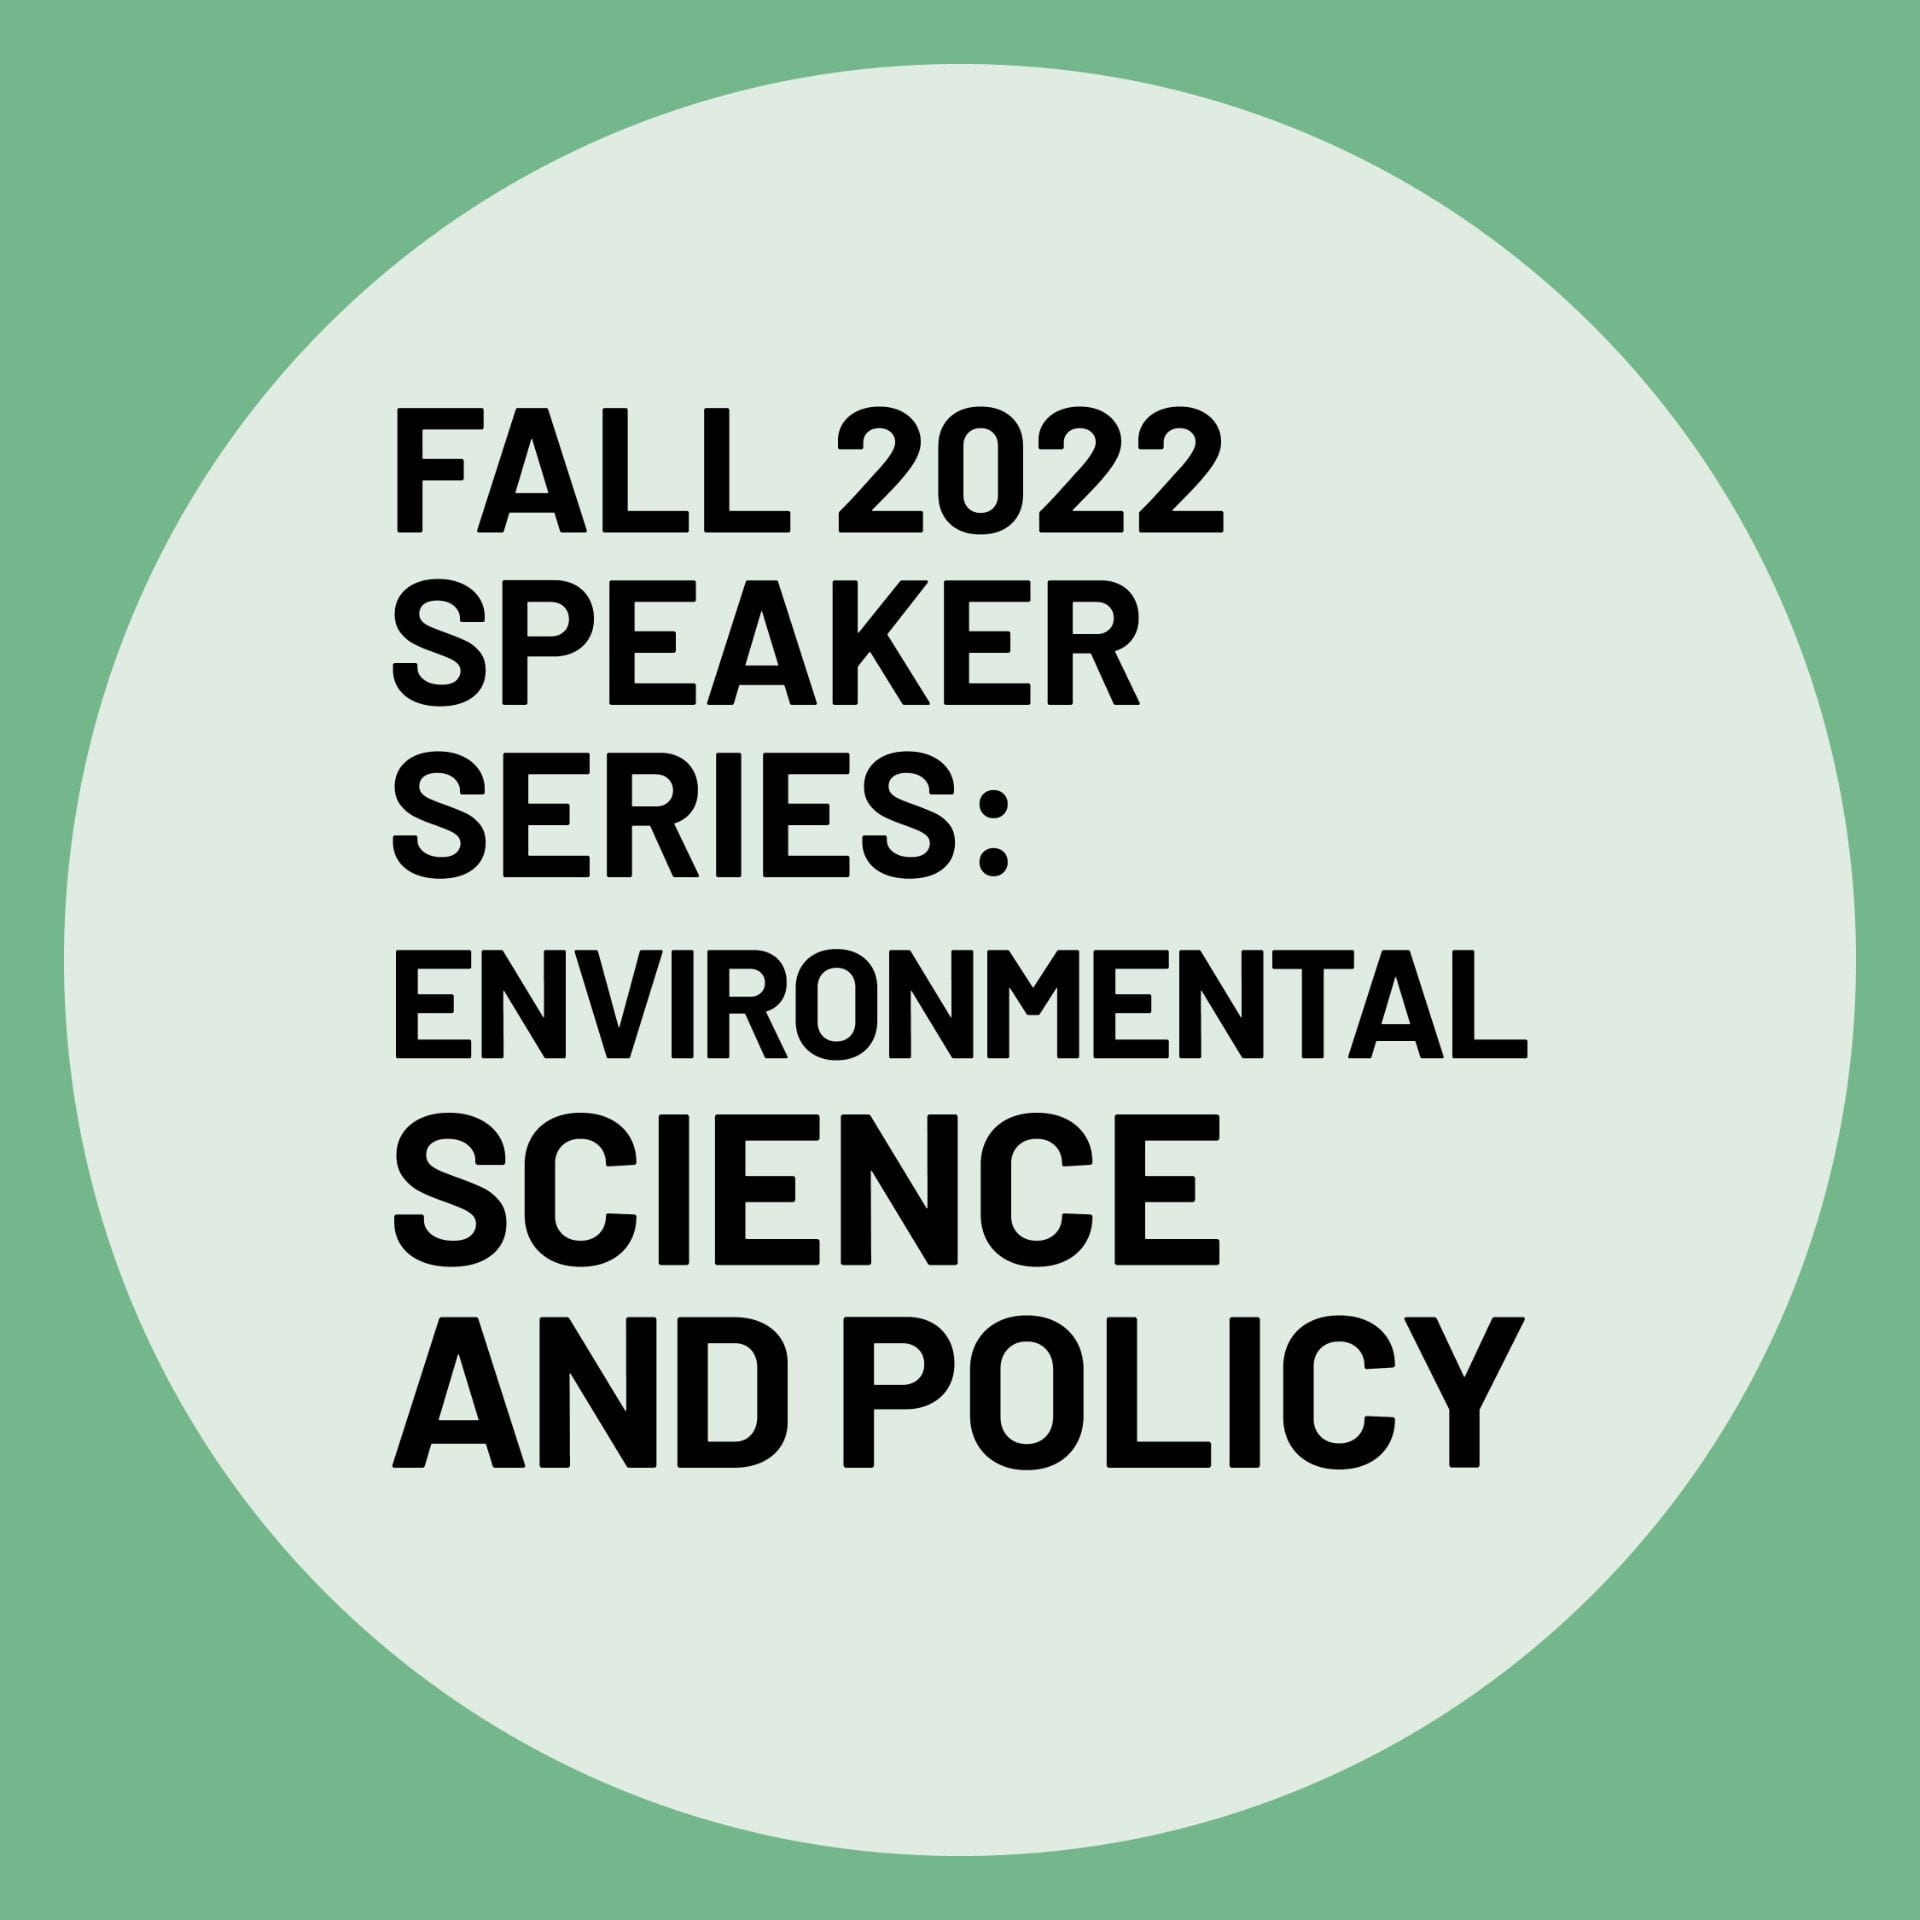 Fall 2022 Speaker Series: Environmental Science and Policy